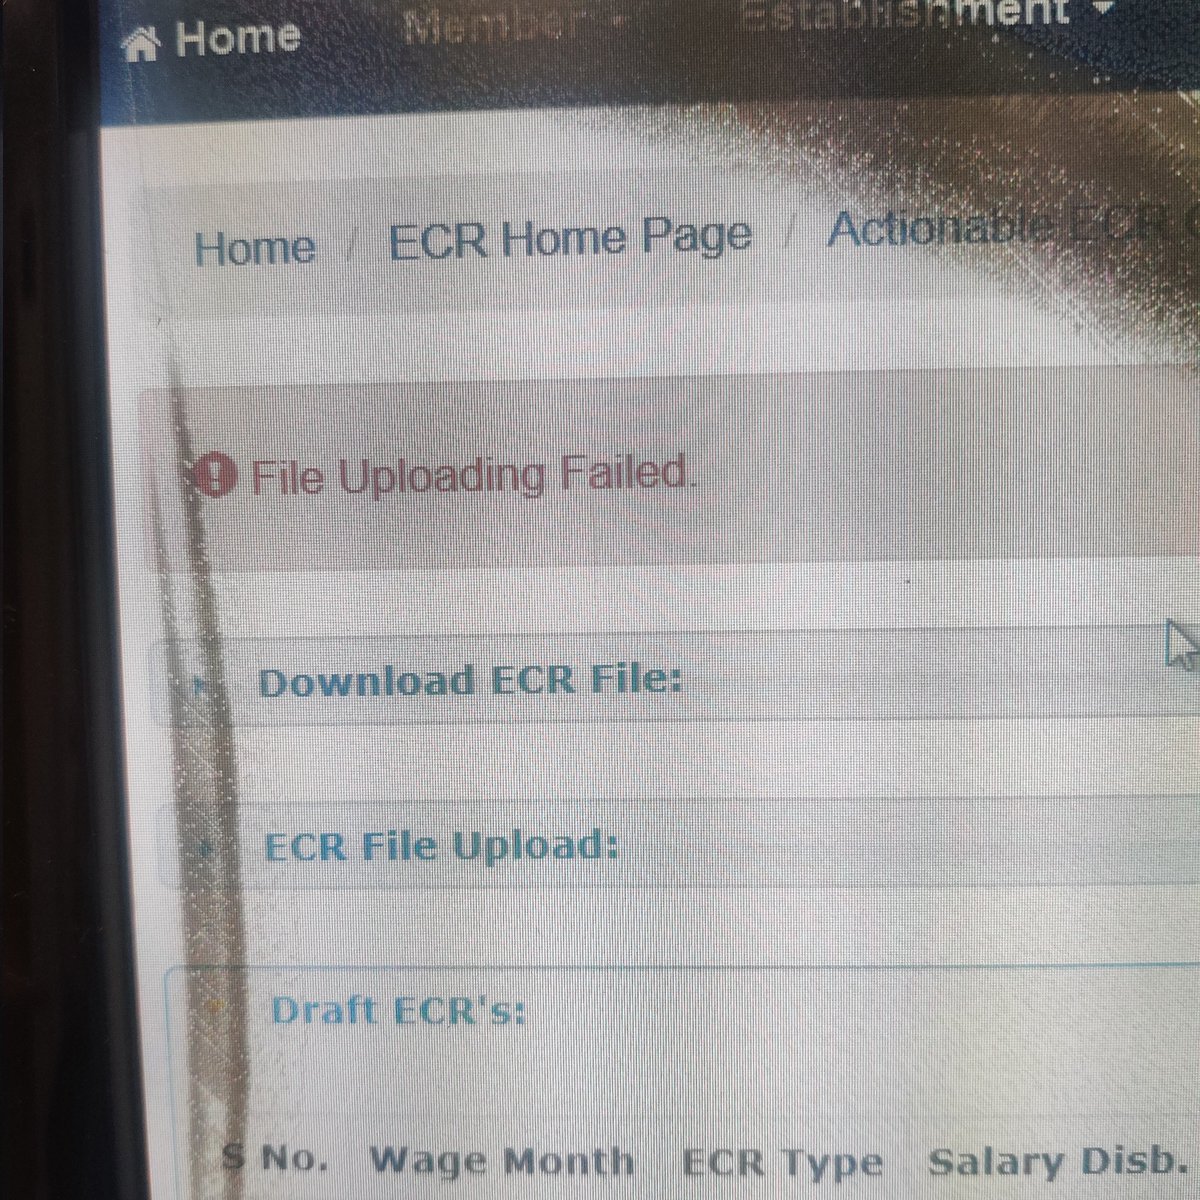 Is anyone getting this error on EPF portal ....since last 2 hrs trying to upload a file #epfo #notuploading #epf